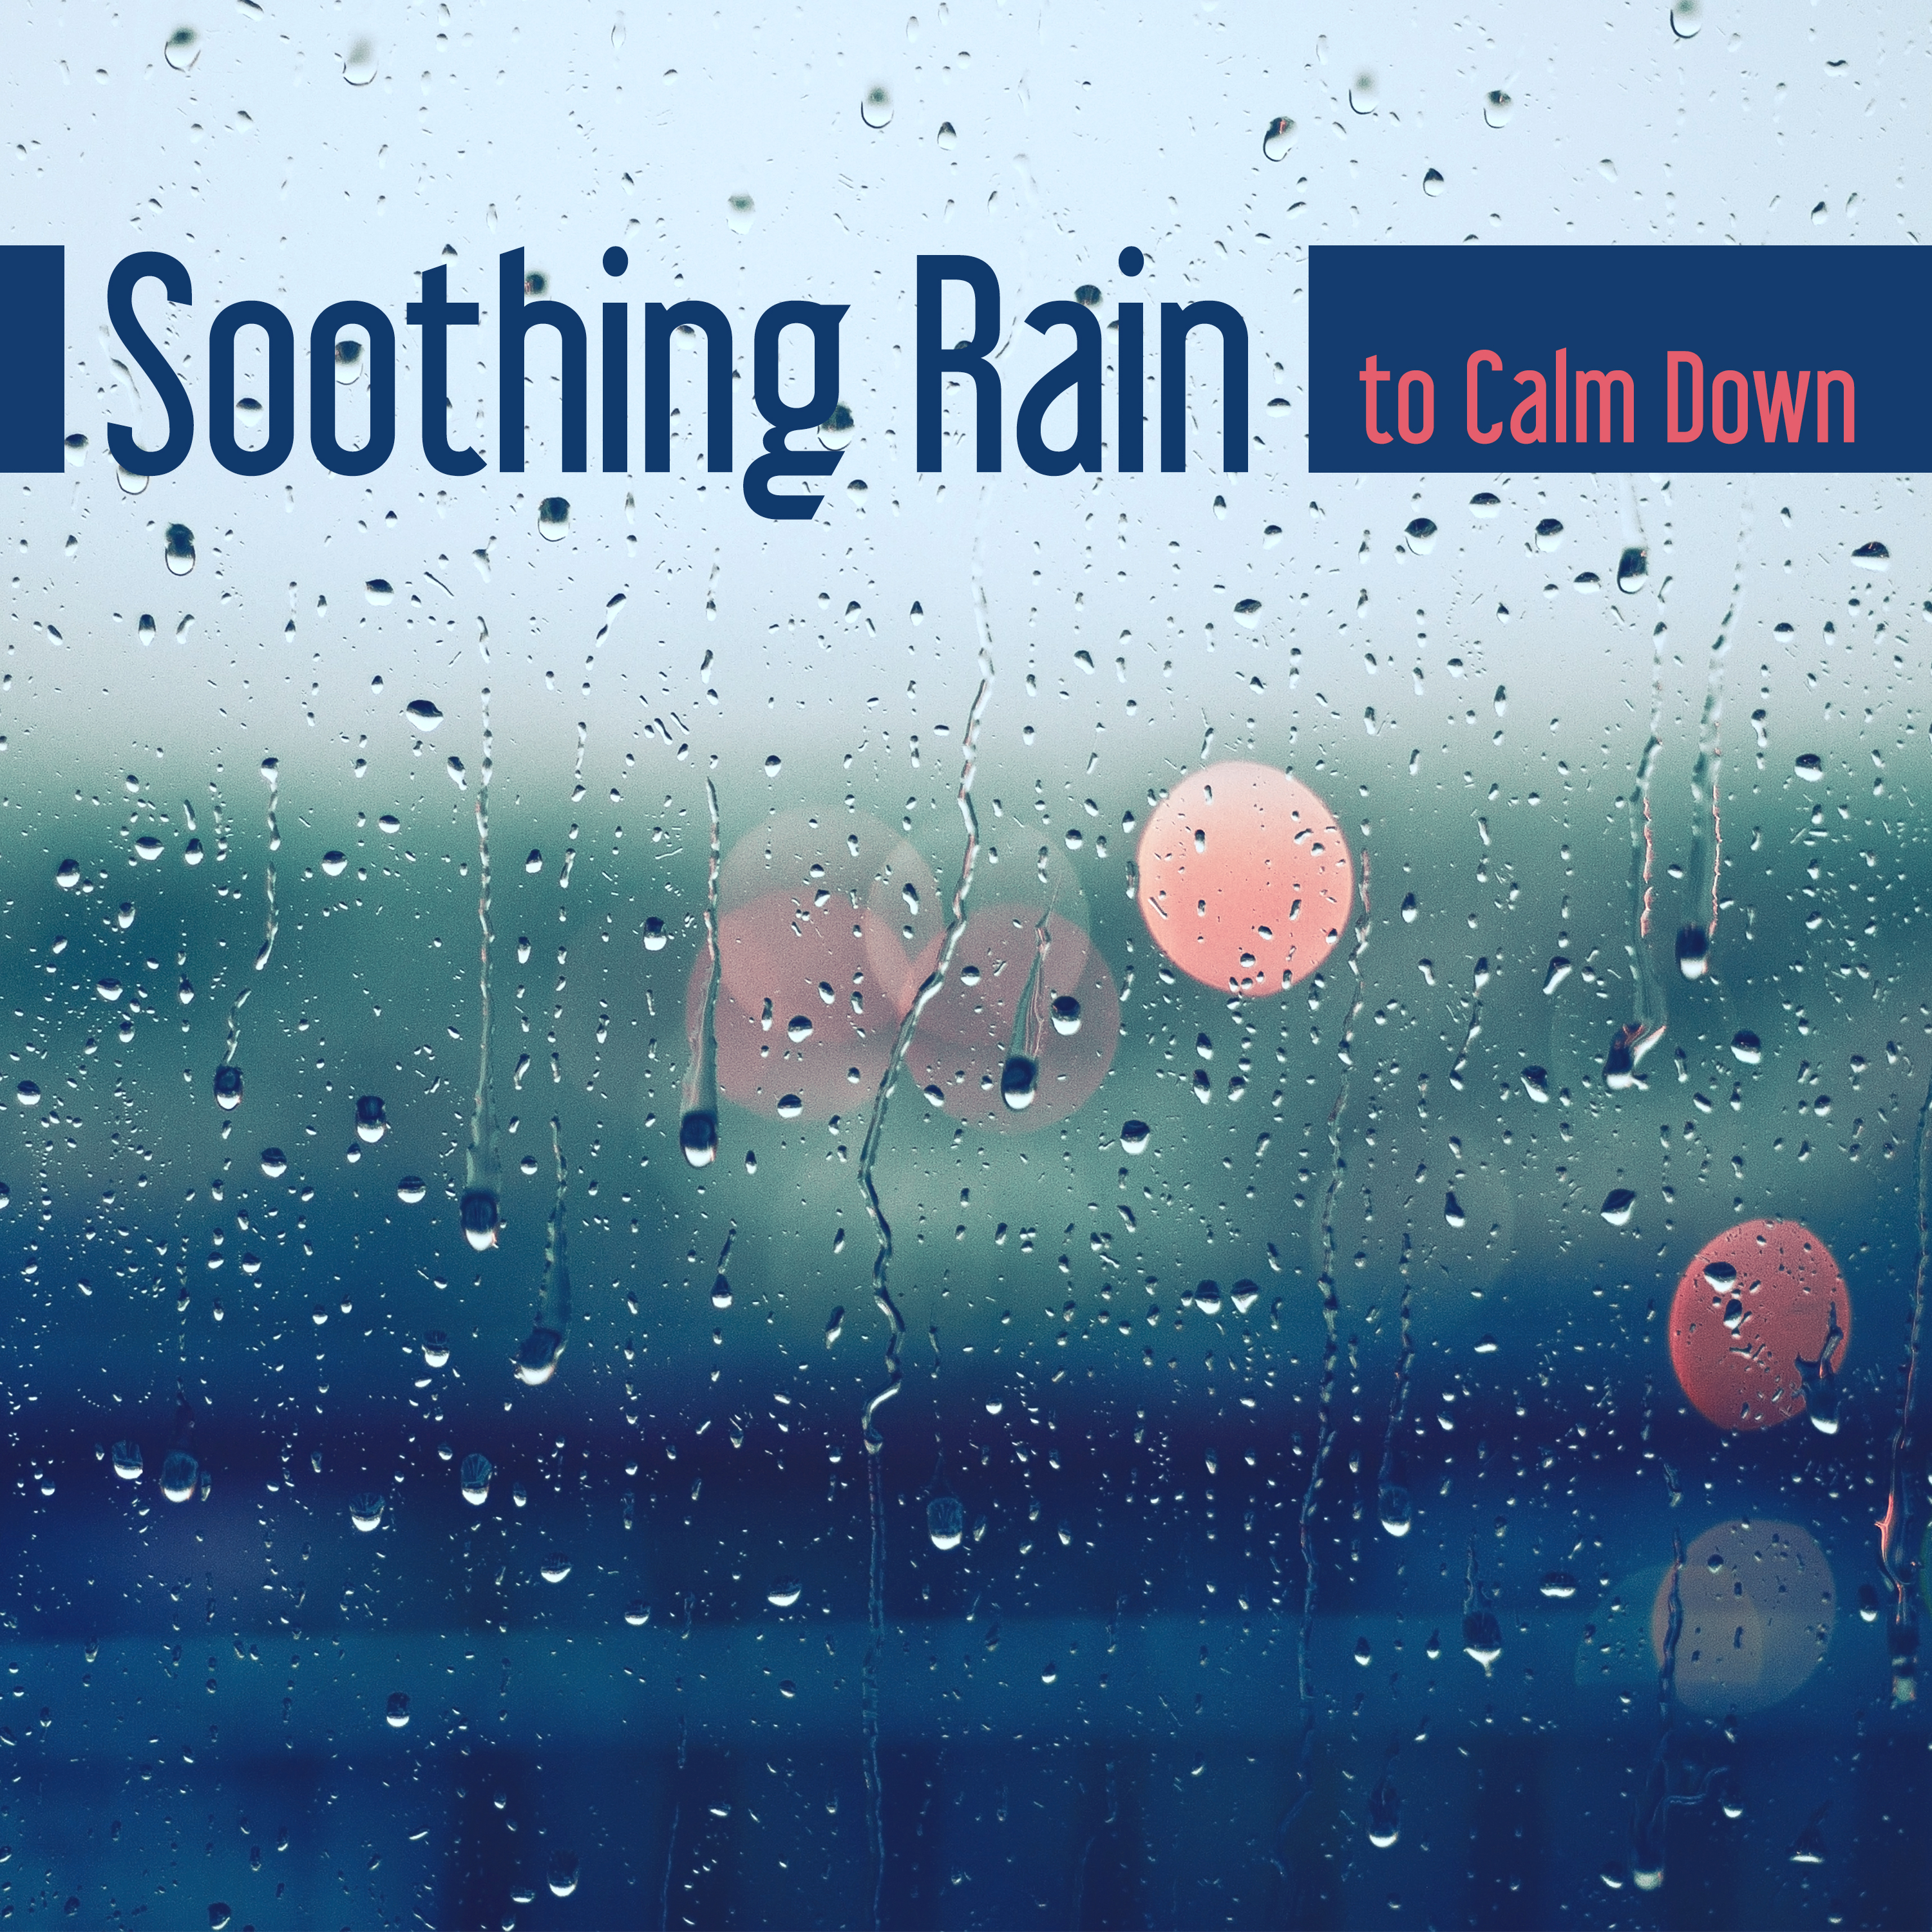 Soothing Rain to Calm Down  Peaceful Mind  Body, No More Stress, Time to Rest  Relax